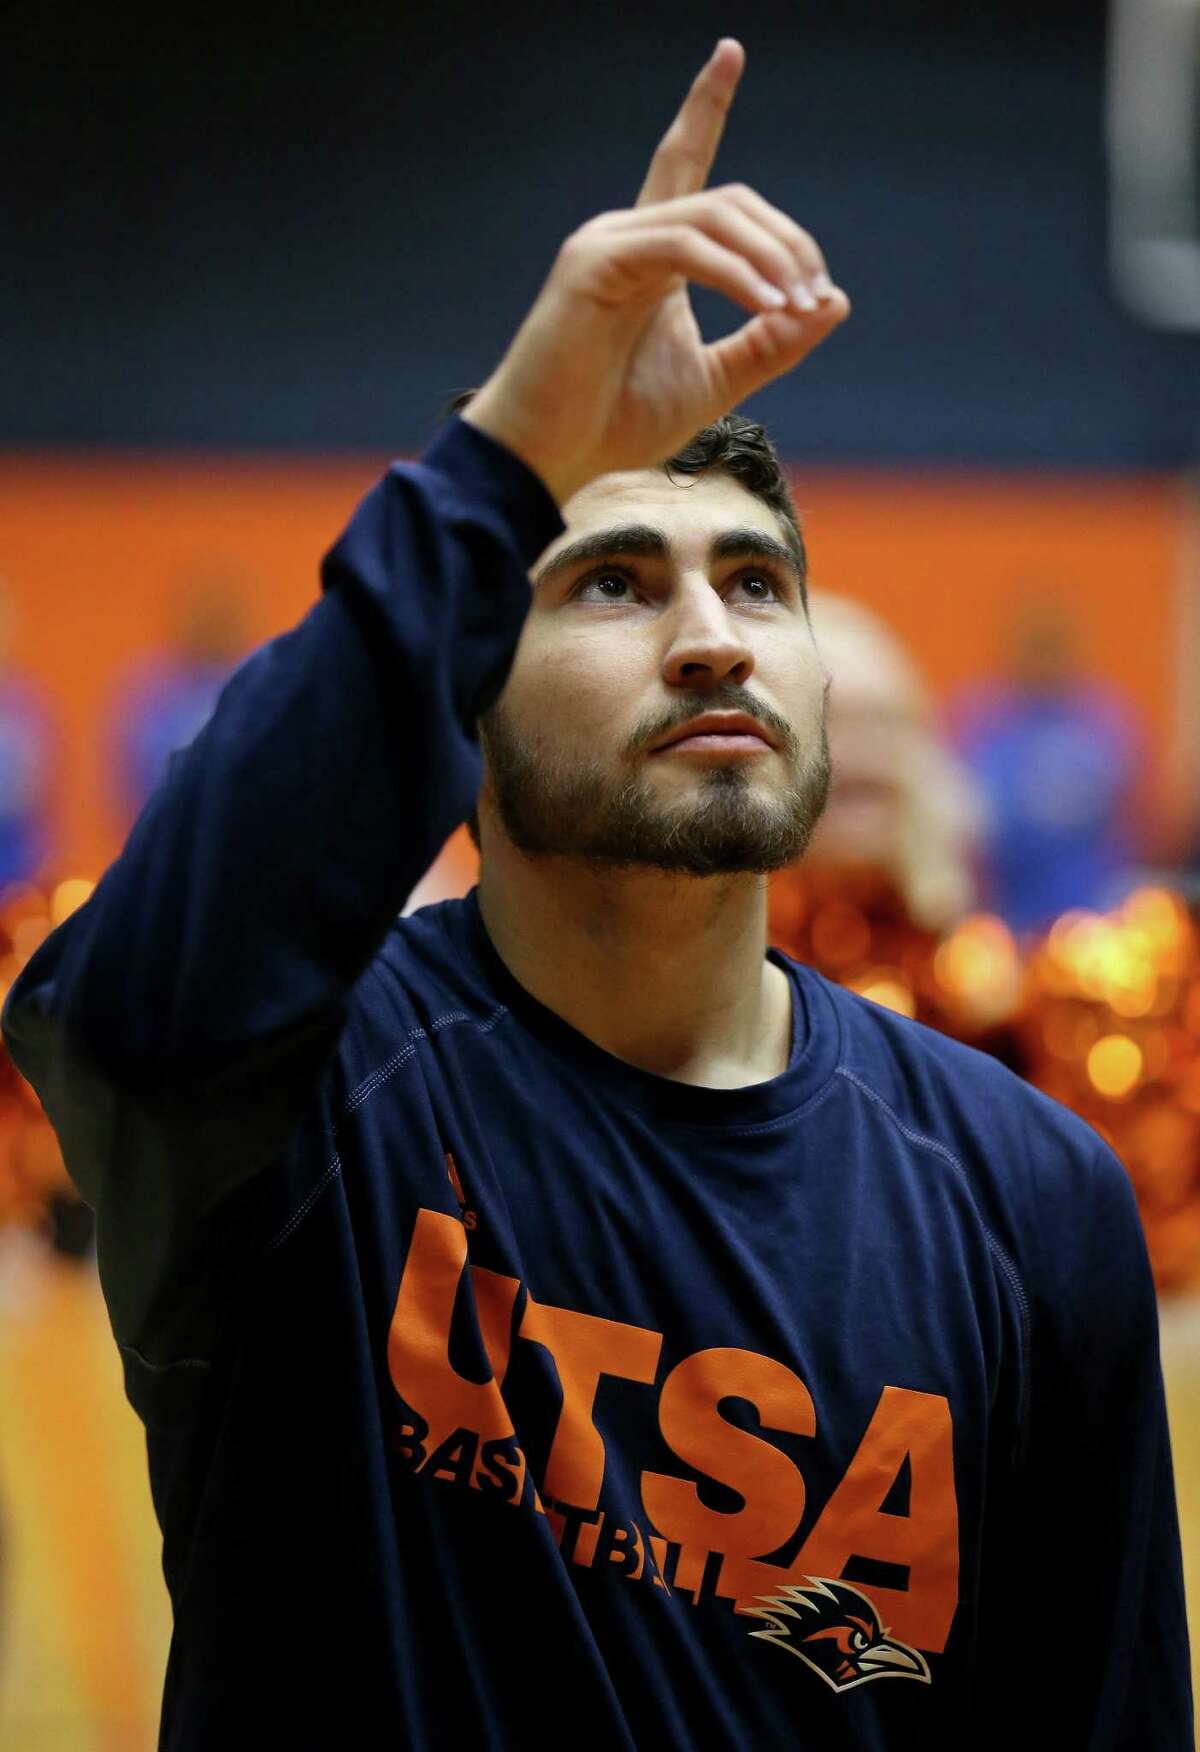 UTSA’s Kyle Massie points after the national anthem before the game with Middle Tennessee on Feb. 2, 2017 at the Convocation Center.